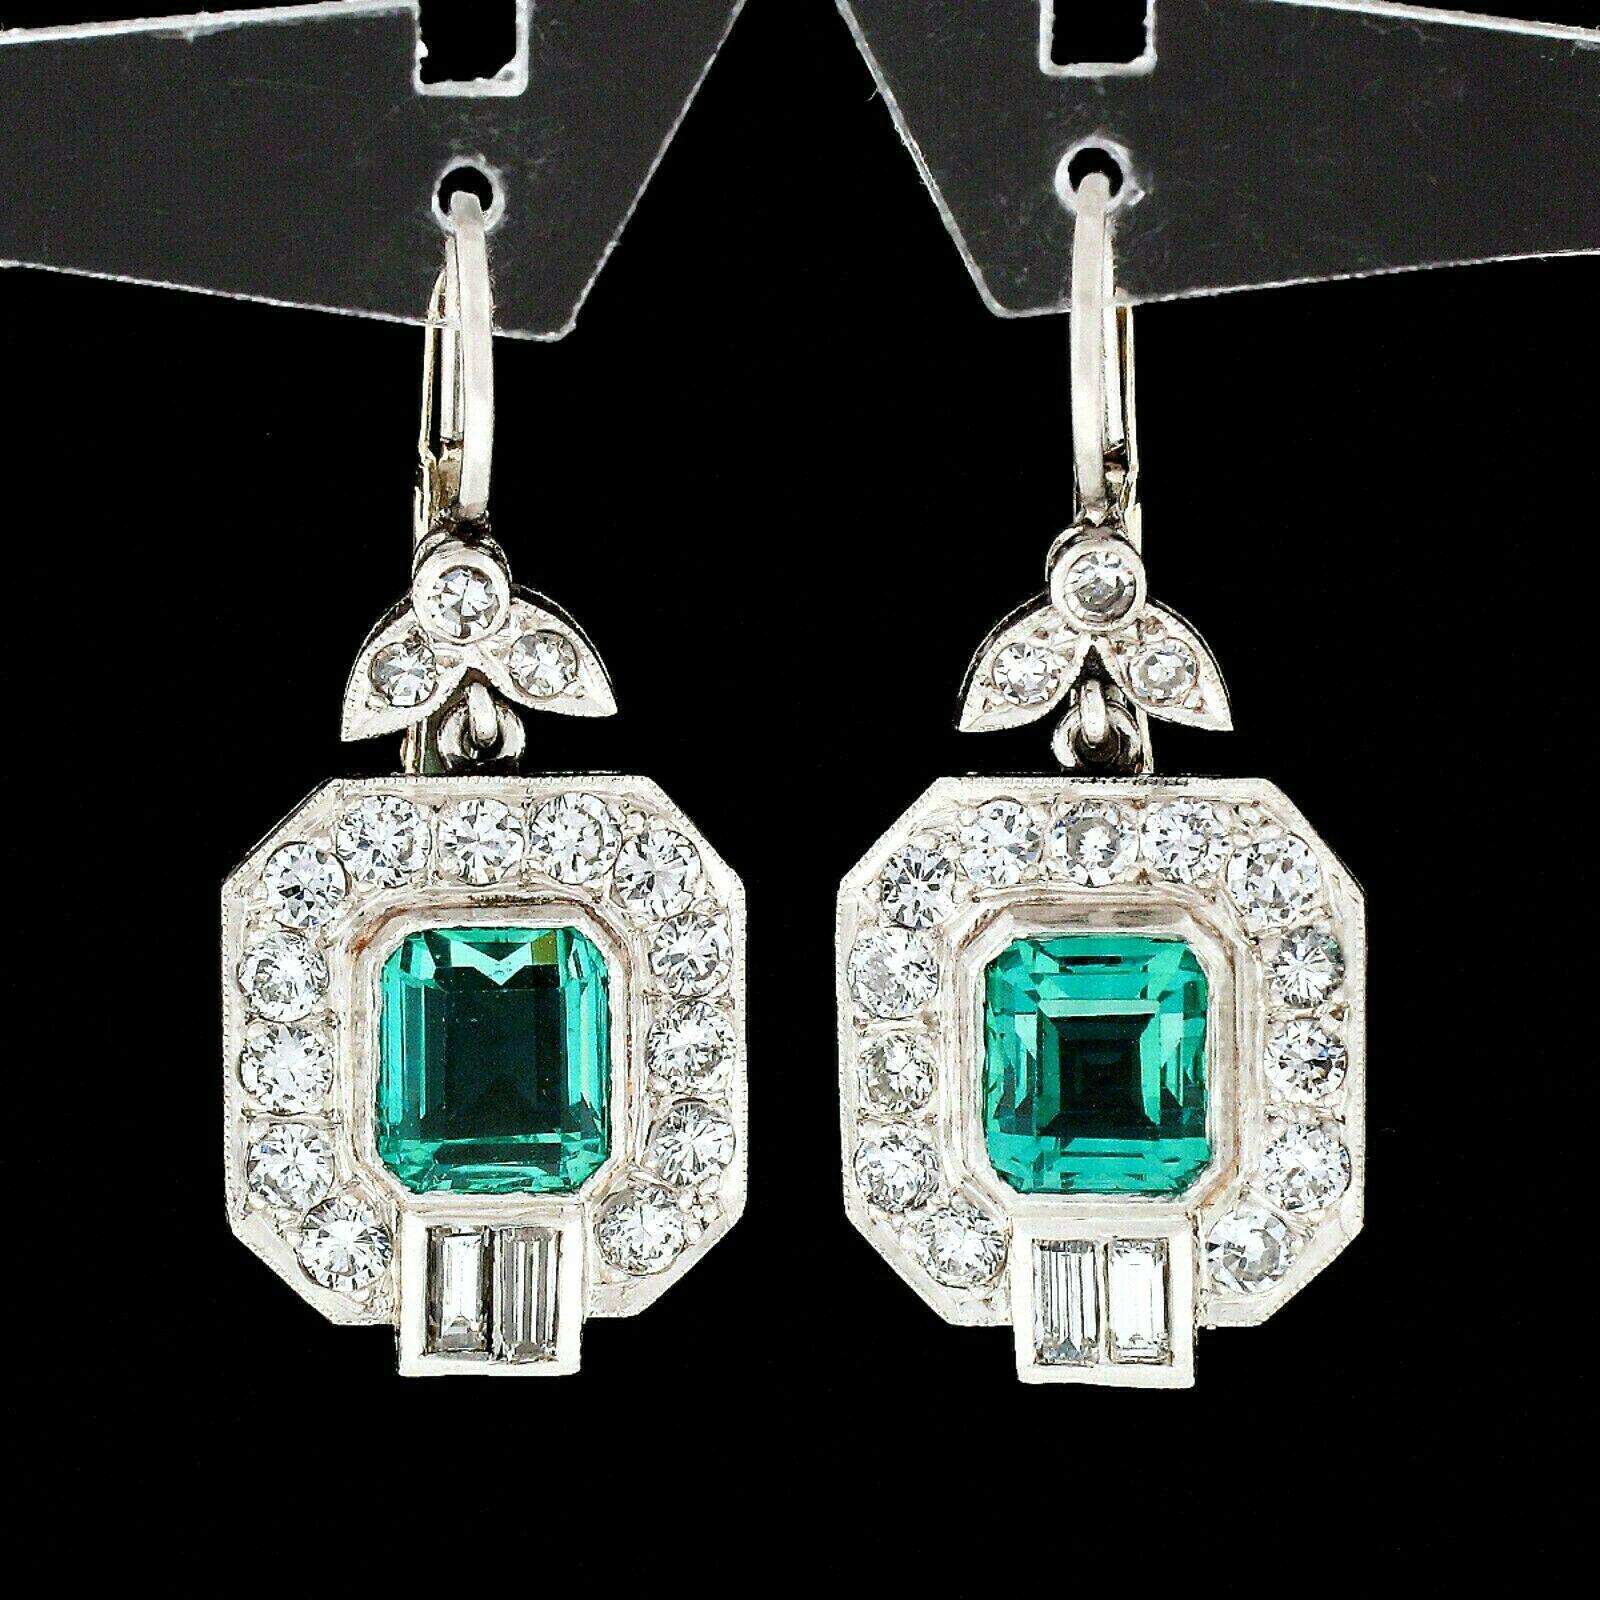 This magnificent and fancy pair of emerald and diamond earrings is crafted in solid platinum and features two gorgeous, Colombian green emeralds that have been certified by GIA. The emeralds weigh approximately 2.80 carats in weight. They display